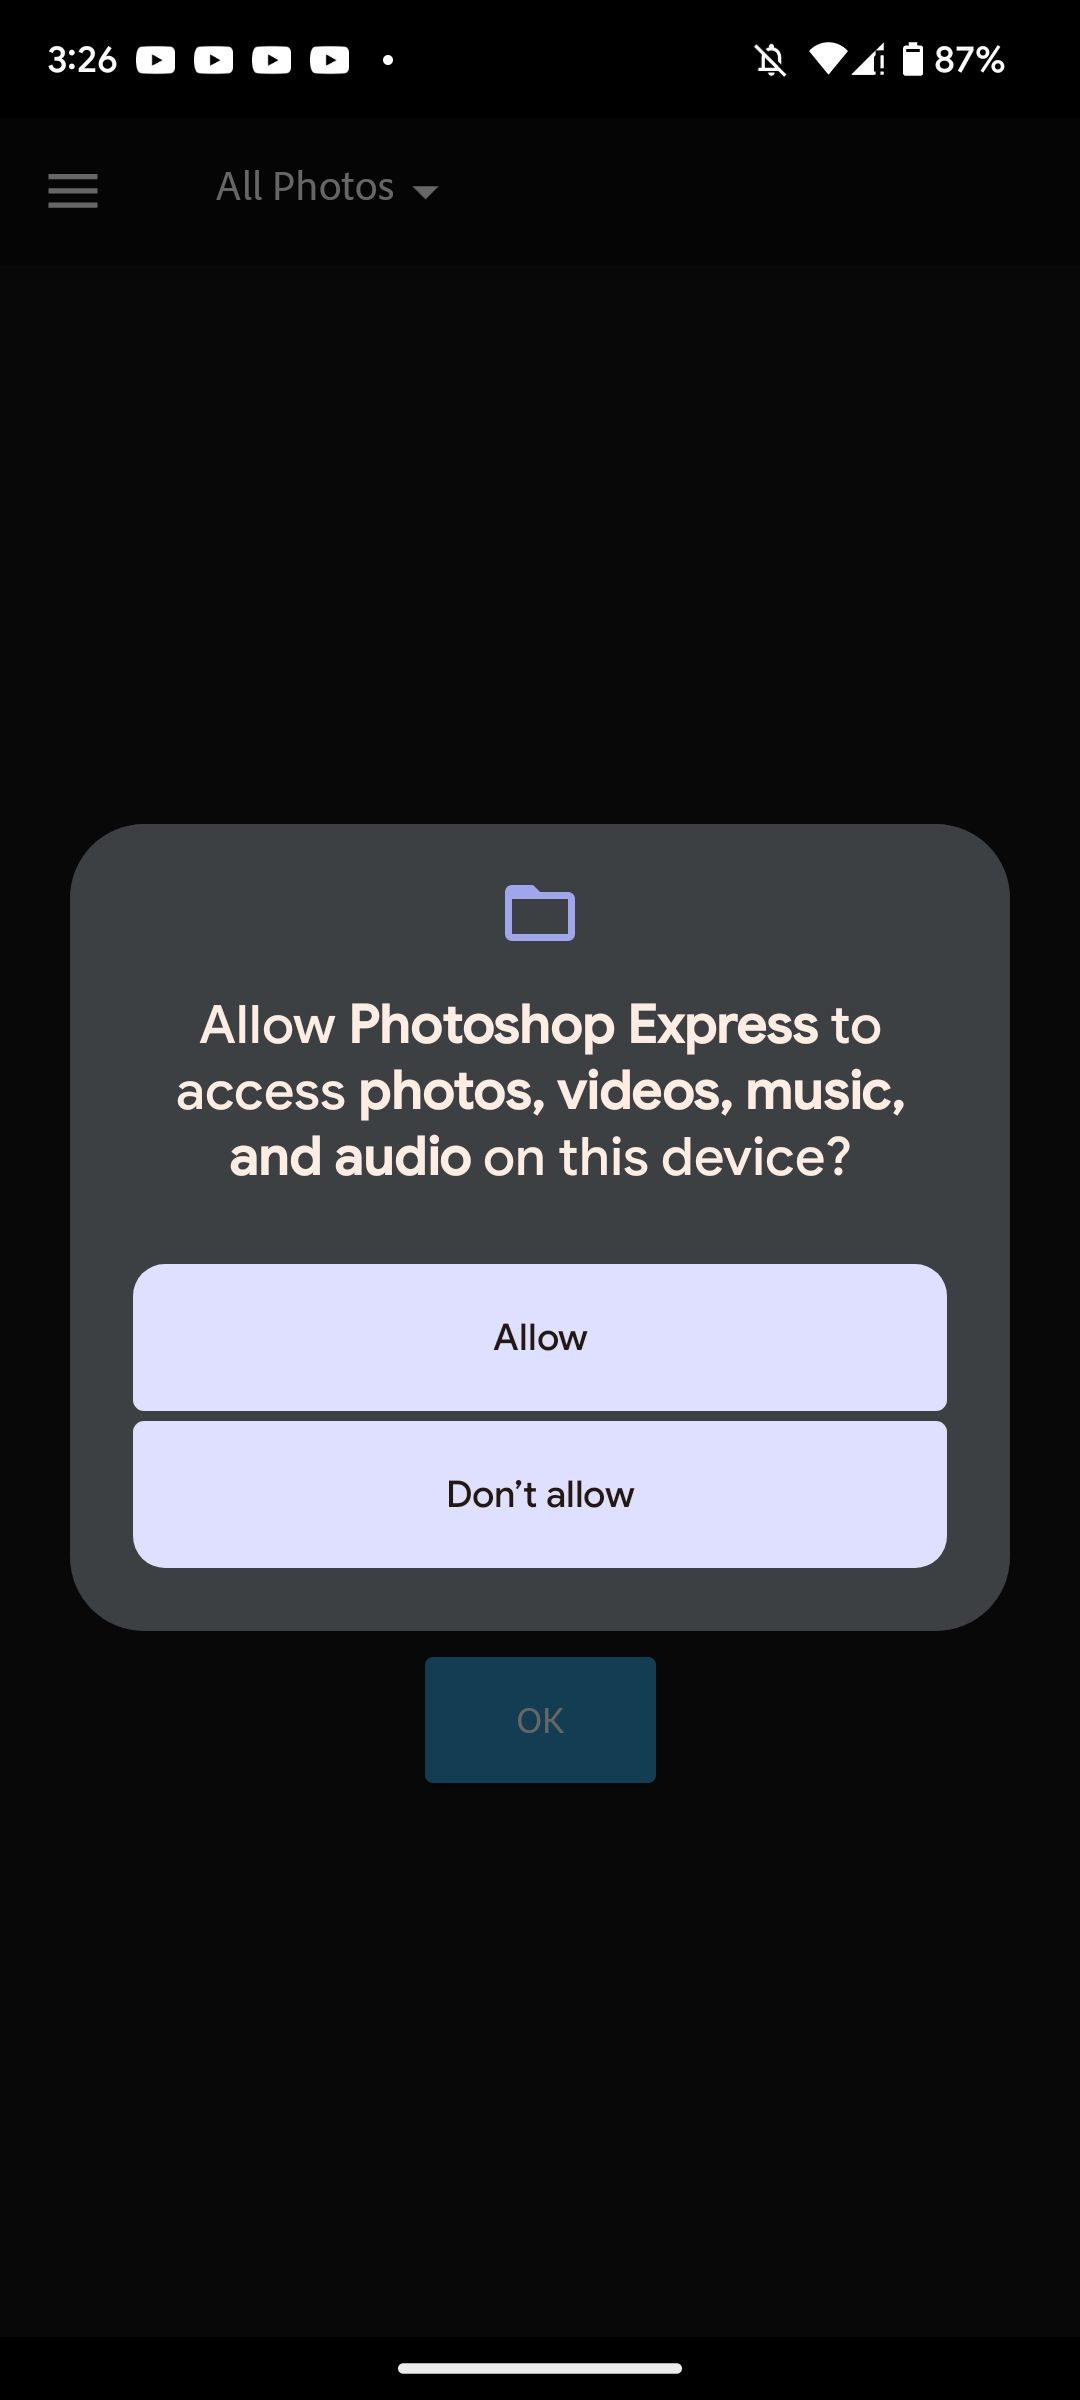 Granting media permissions to PhotoShop Express Photo Editor app on Android